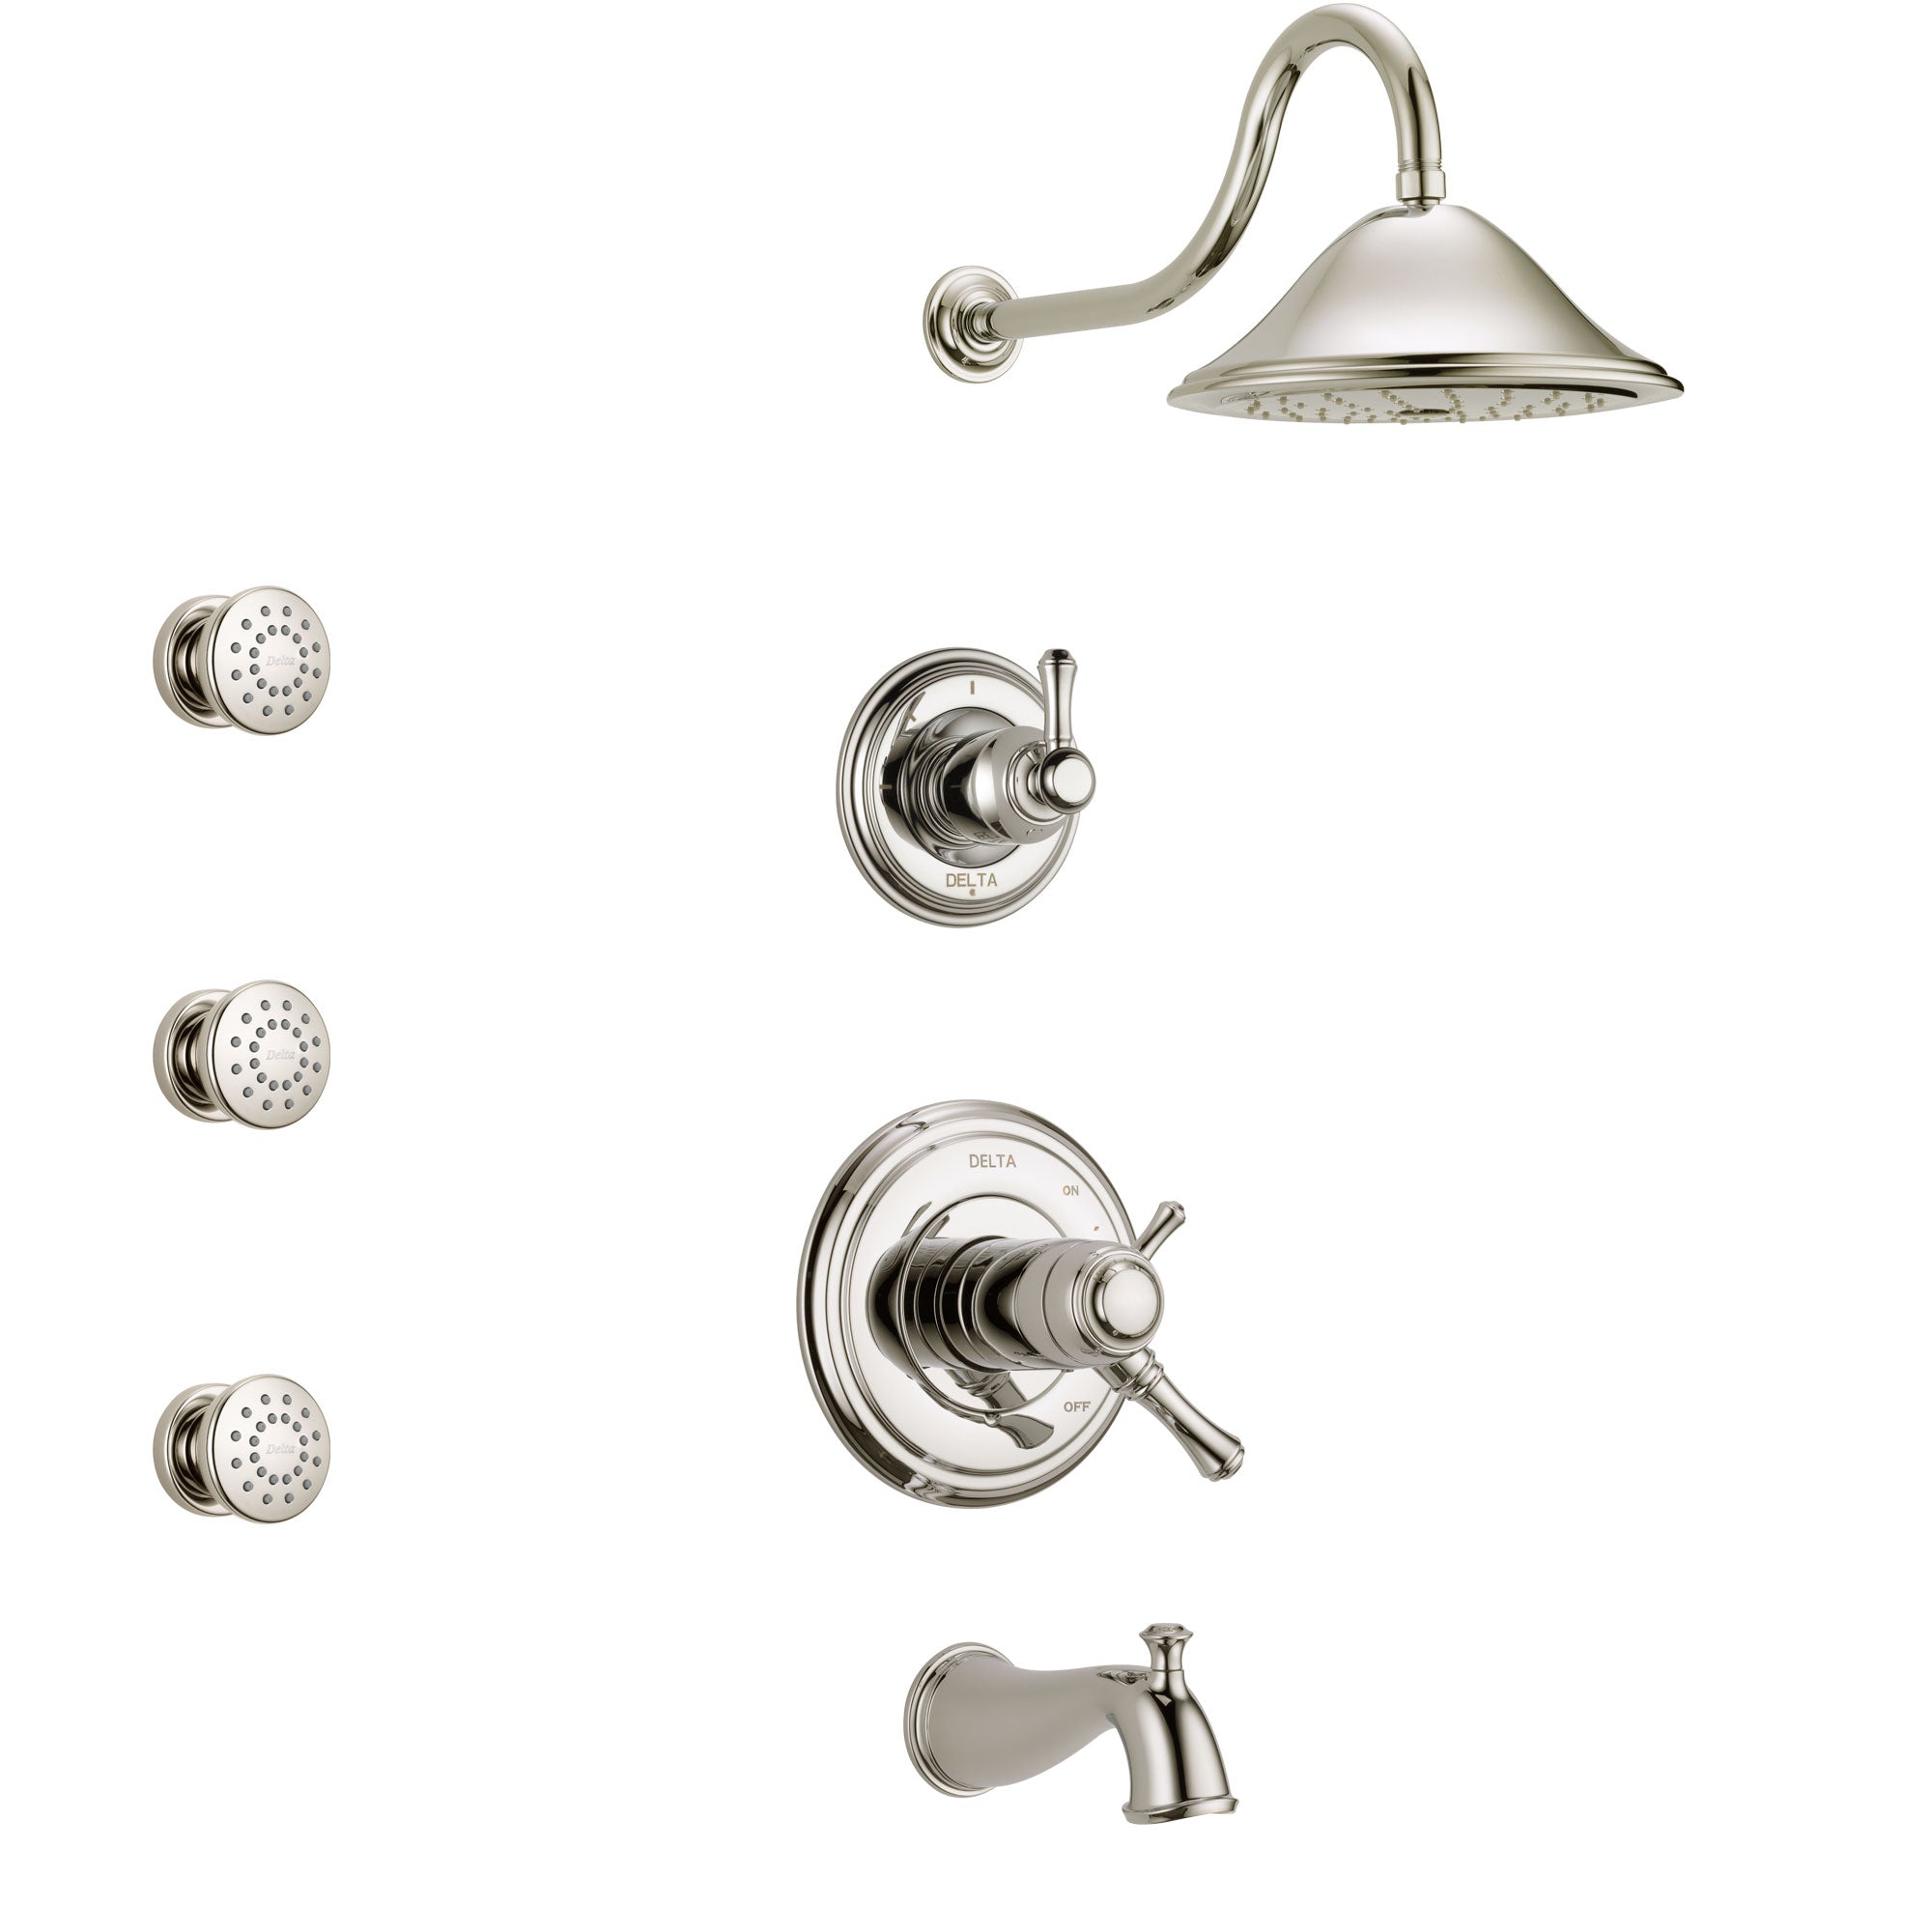 Delta Cassidy Polished Nickel Tub and Shower System with Dual Thermostatic Control Handle, Diverter, Showerhead, and 3 Body Sprays SS17T4972PN1